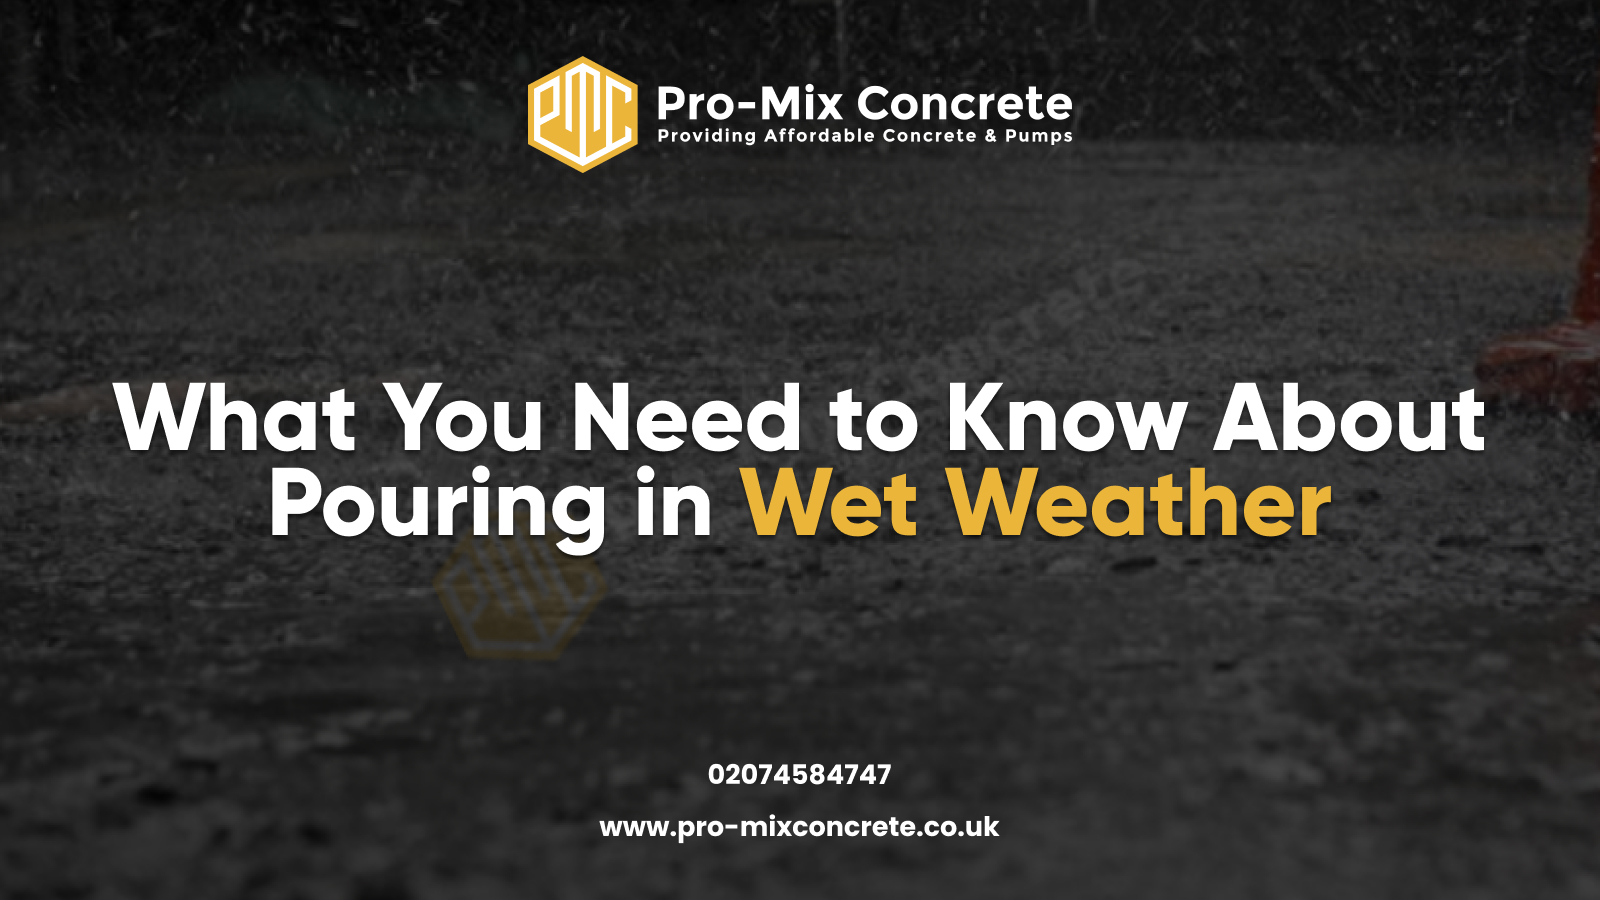 Concrete in Rain: What You Need to Know About Pouring in Wet Weather